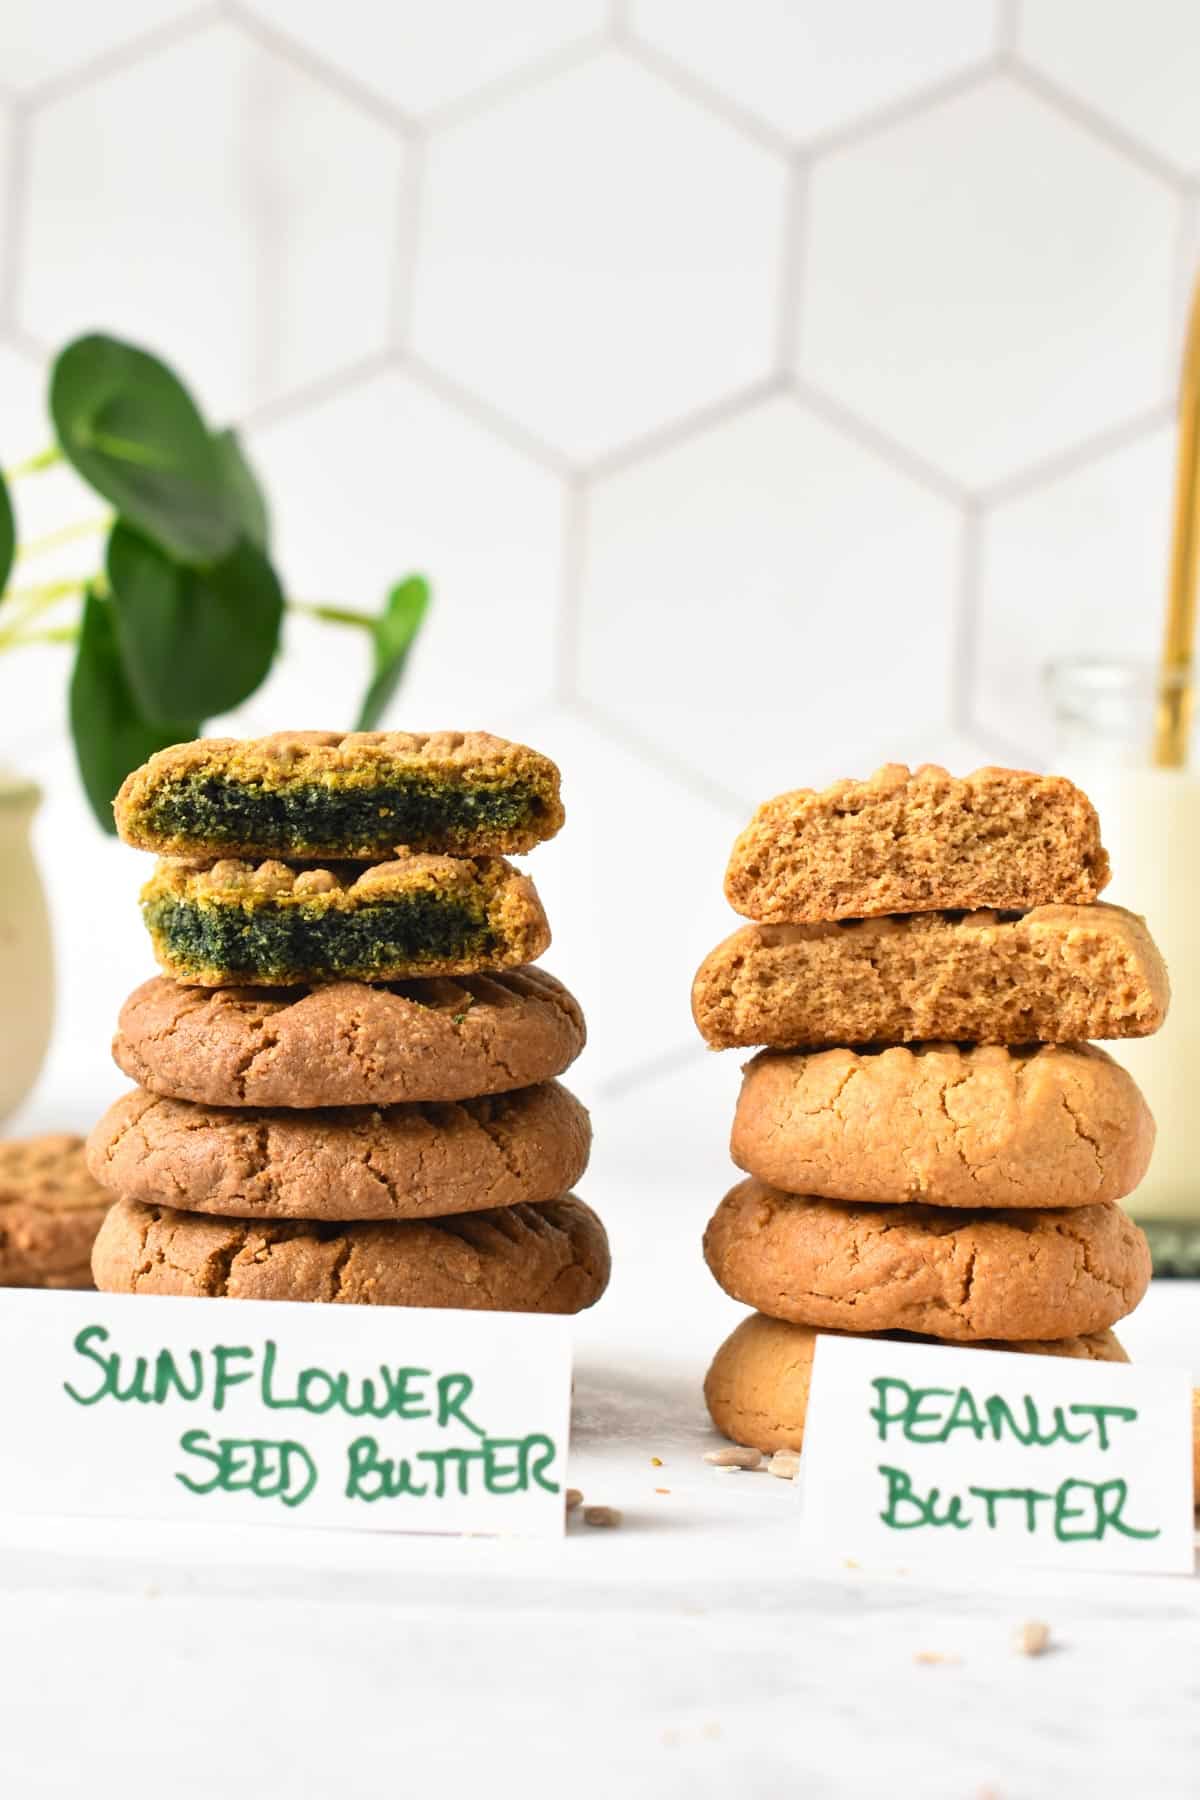 a picture of two stack of cookies one made with sunflower seed butter showing that the inside of the cookies turns green while the other stack of peanut butetr cookie stays golden